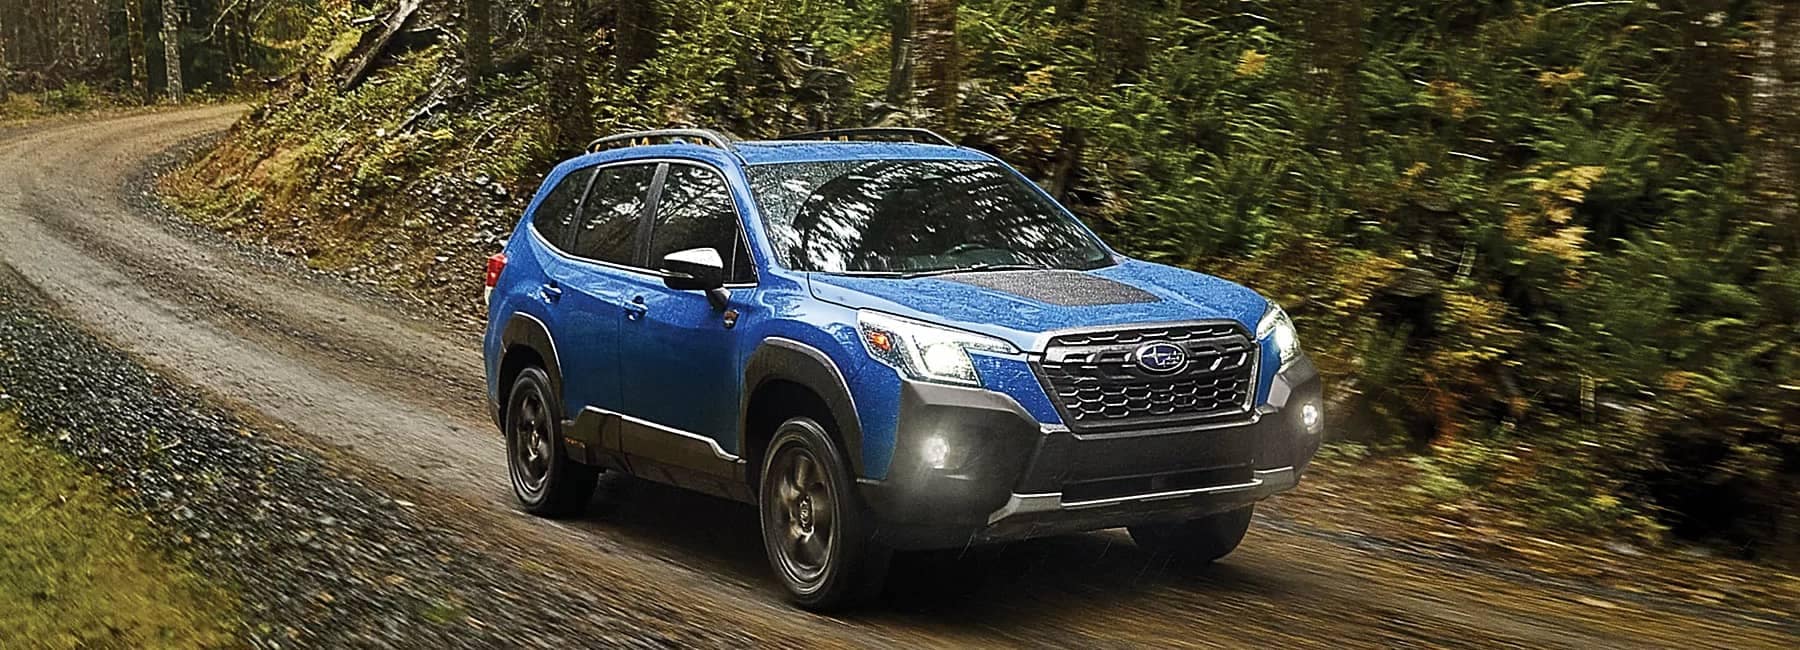 2022 Forester- front 3qview-driving dirt path-navy blue